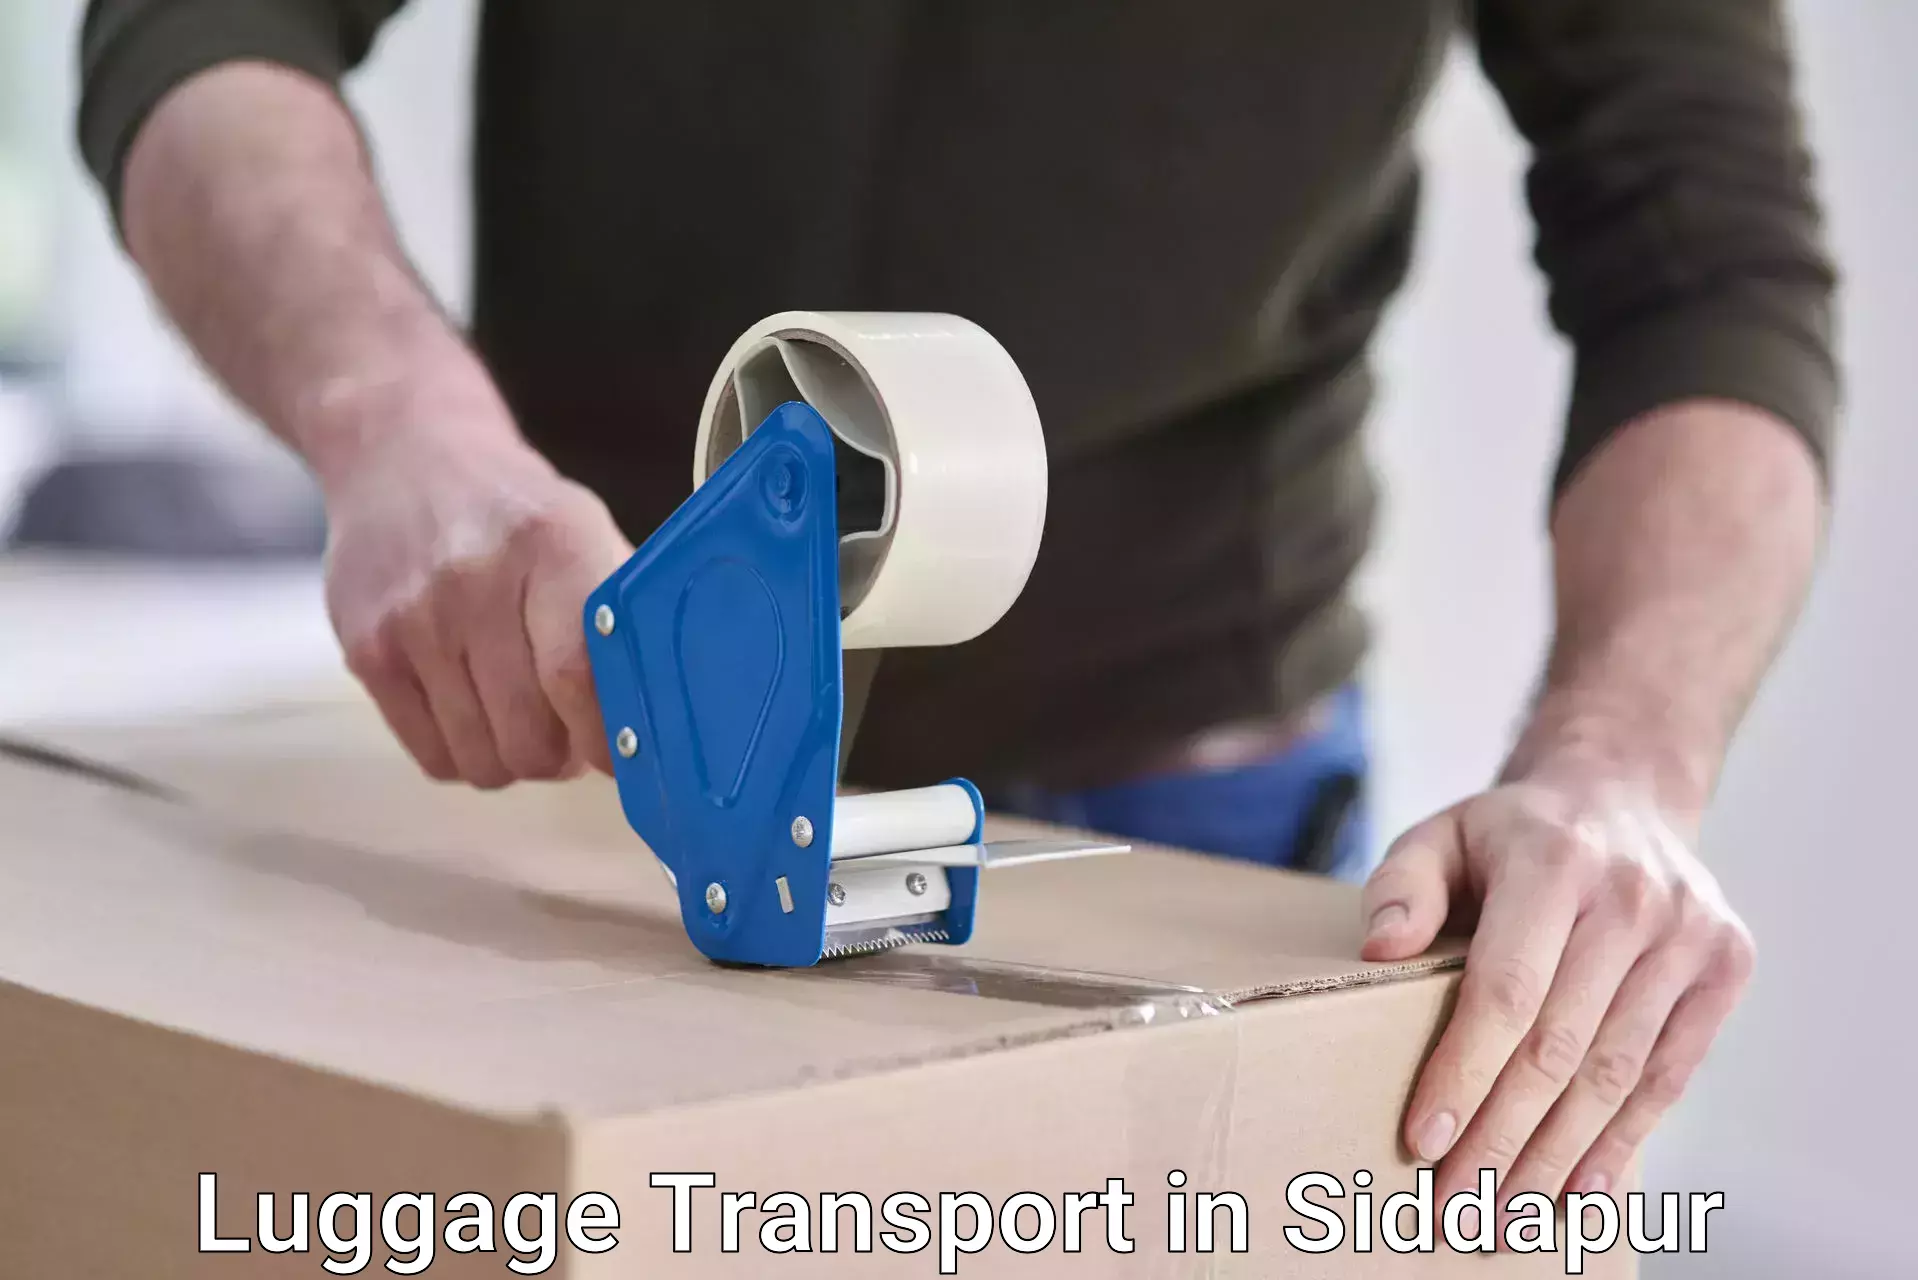 Baggage transport technology in Siddapur